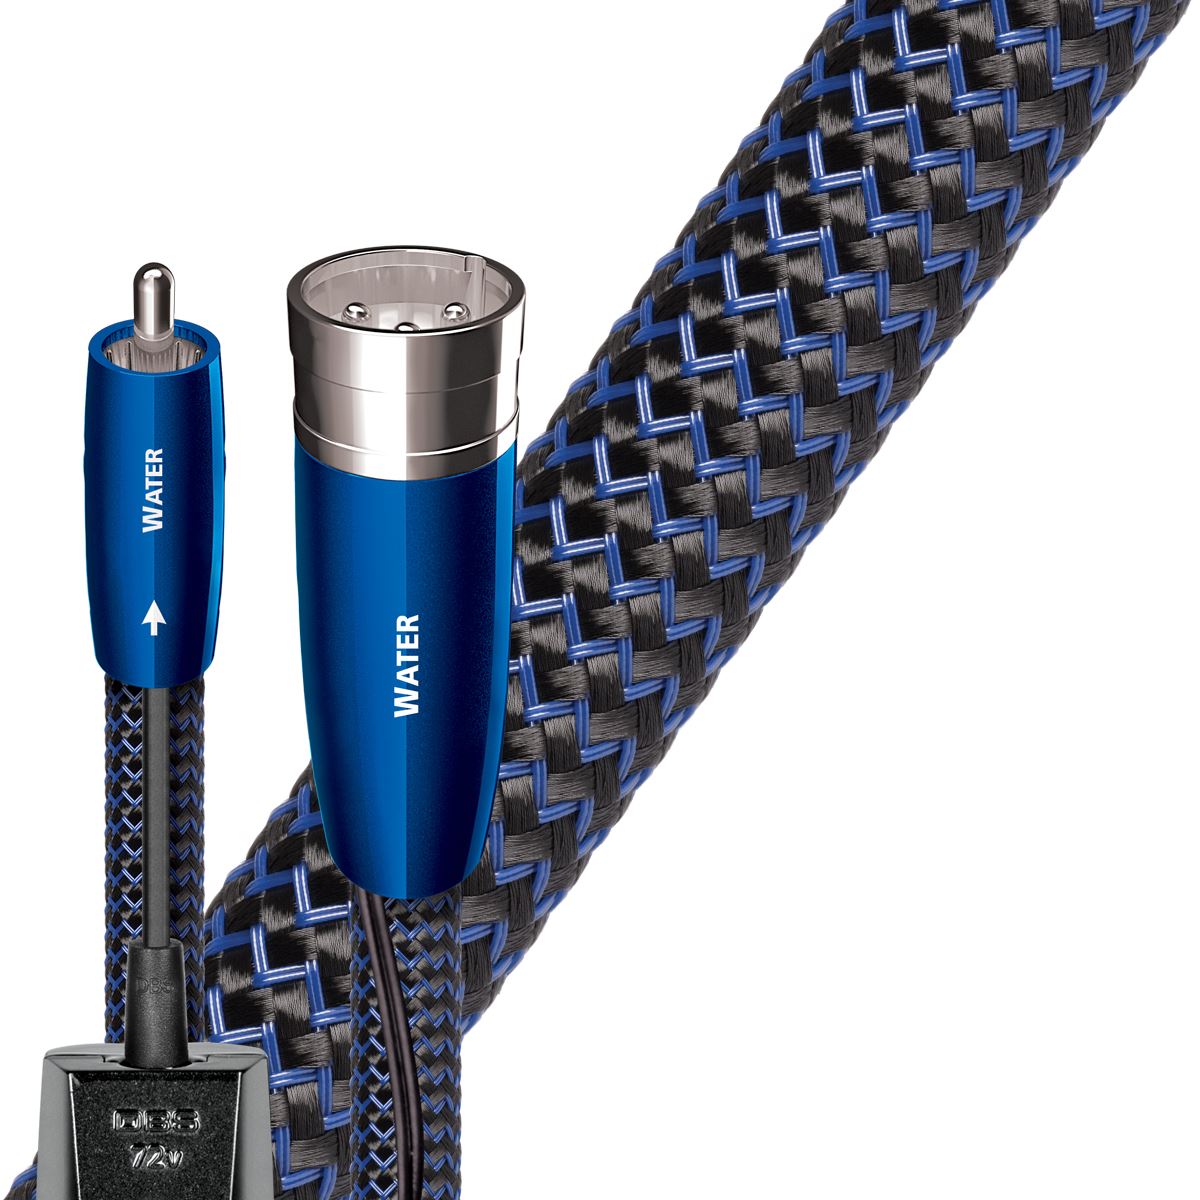 AUDIOQUEST_Water_.75M_XLR_to_XLR_pair._Solid_perfect_surface_copper_plus._Triple_balanced._Polyethylene_air-tubes._Cold-welded,silver_over_copper_TER_Jacket_-_blue_-_black_braid 2057